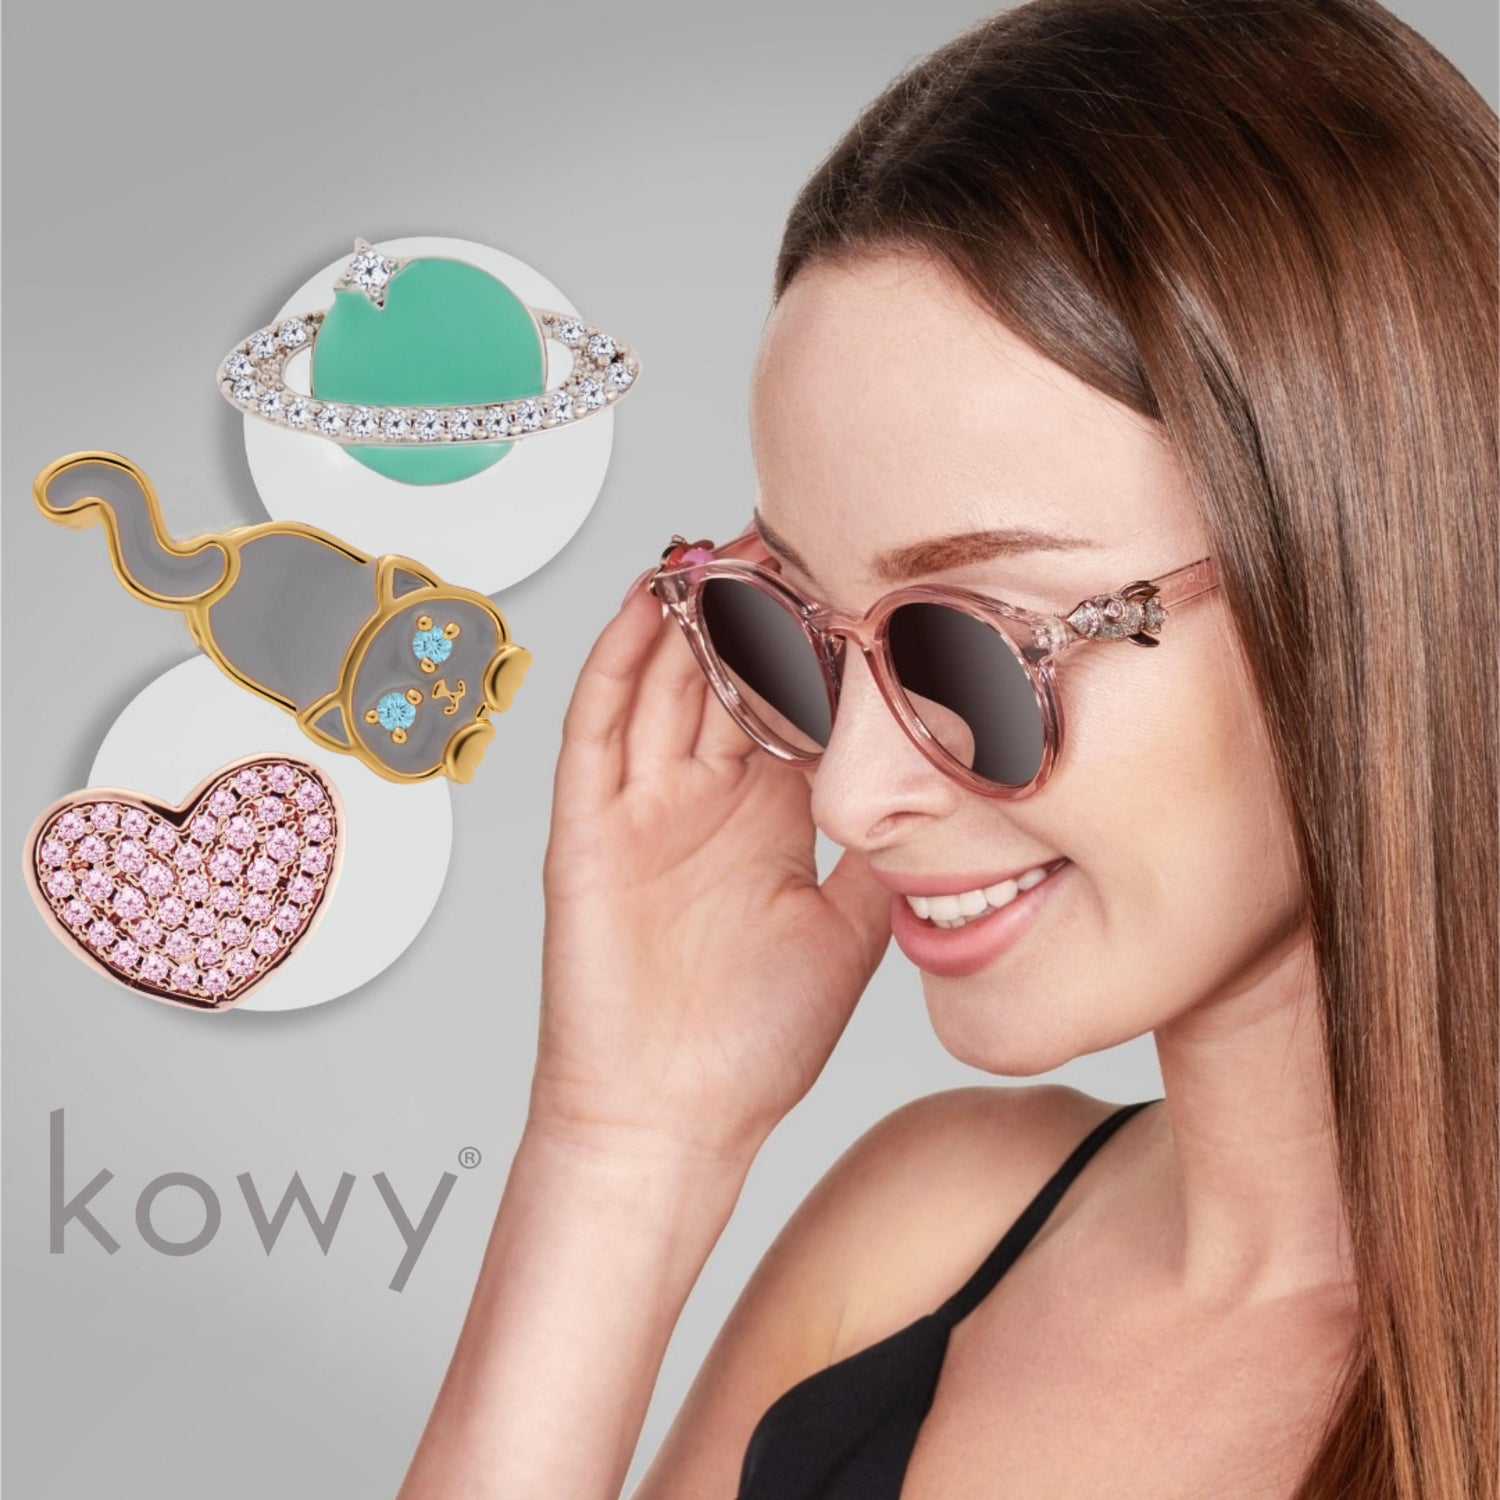 Choose your Kowy®